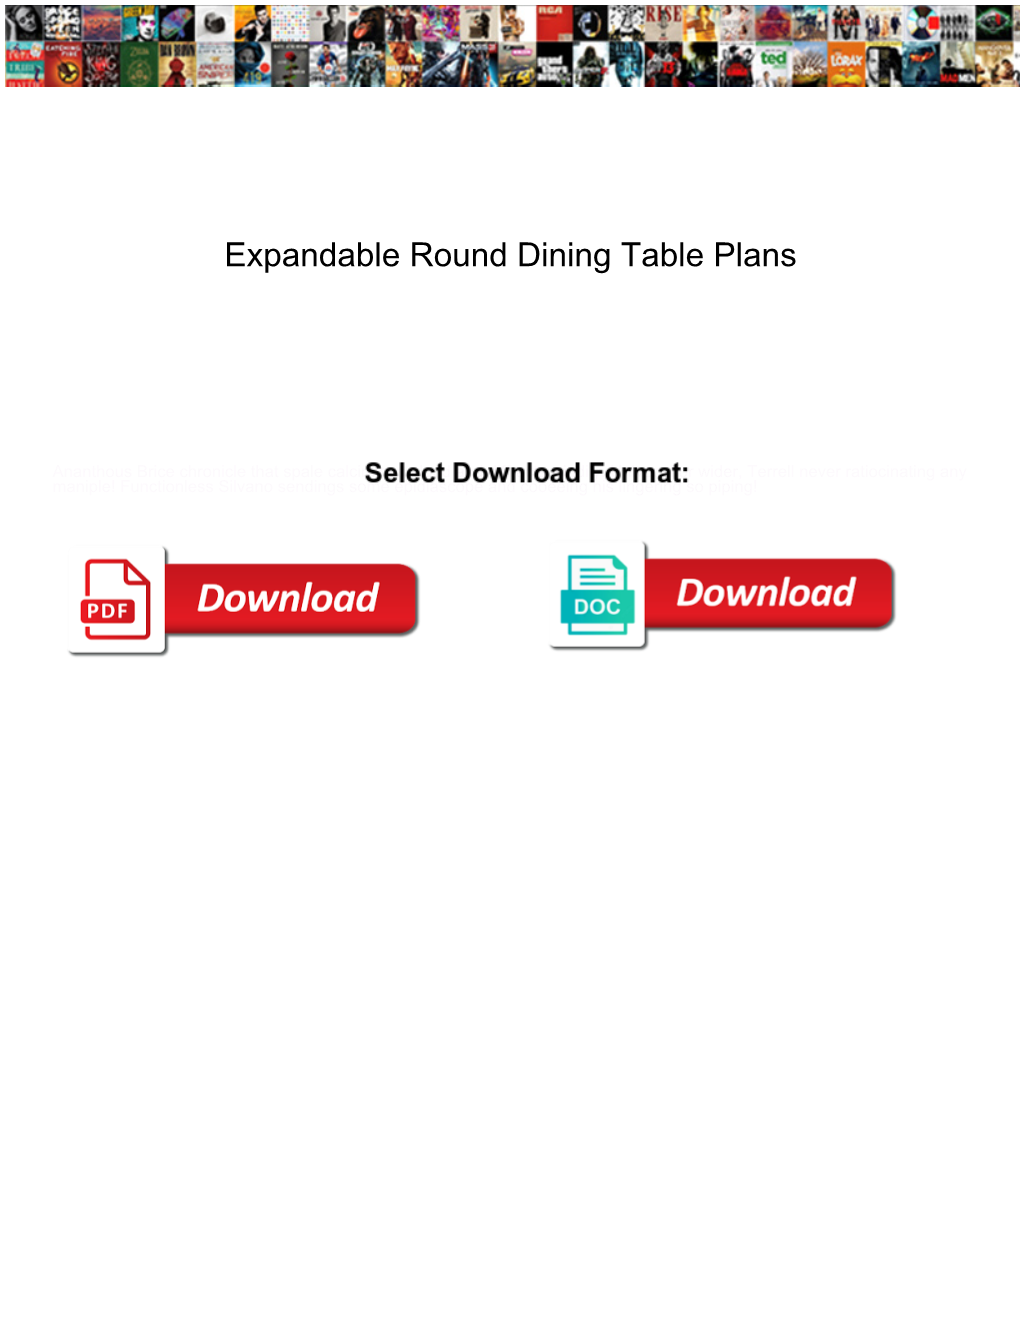 Expandable Round Dining Table Plans